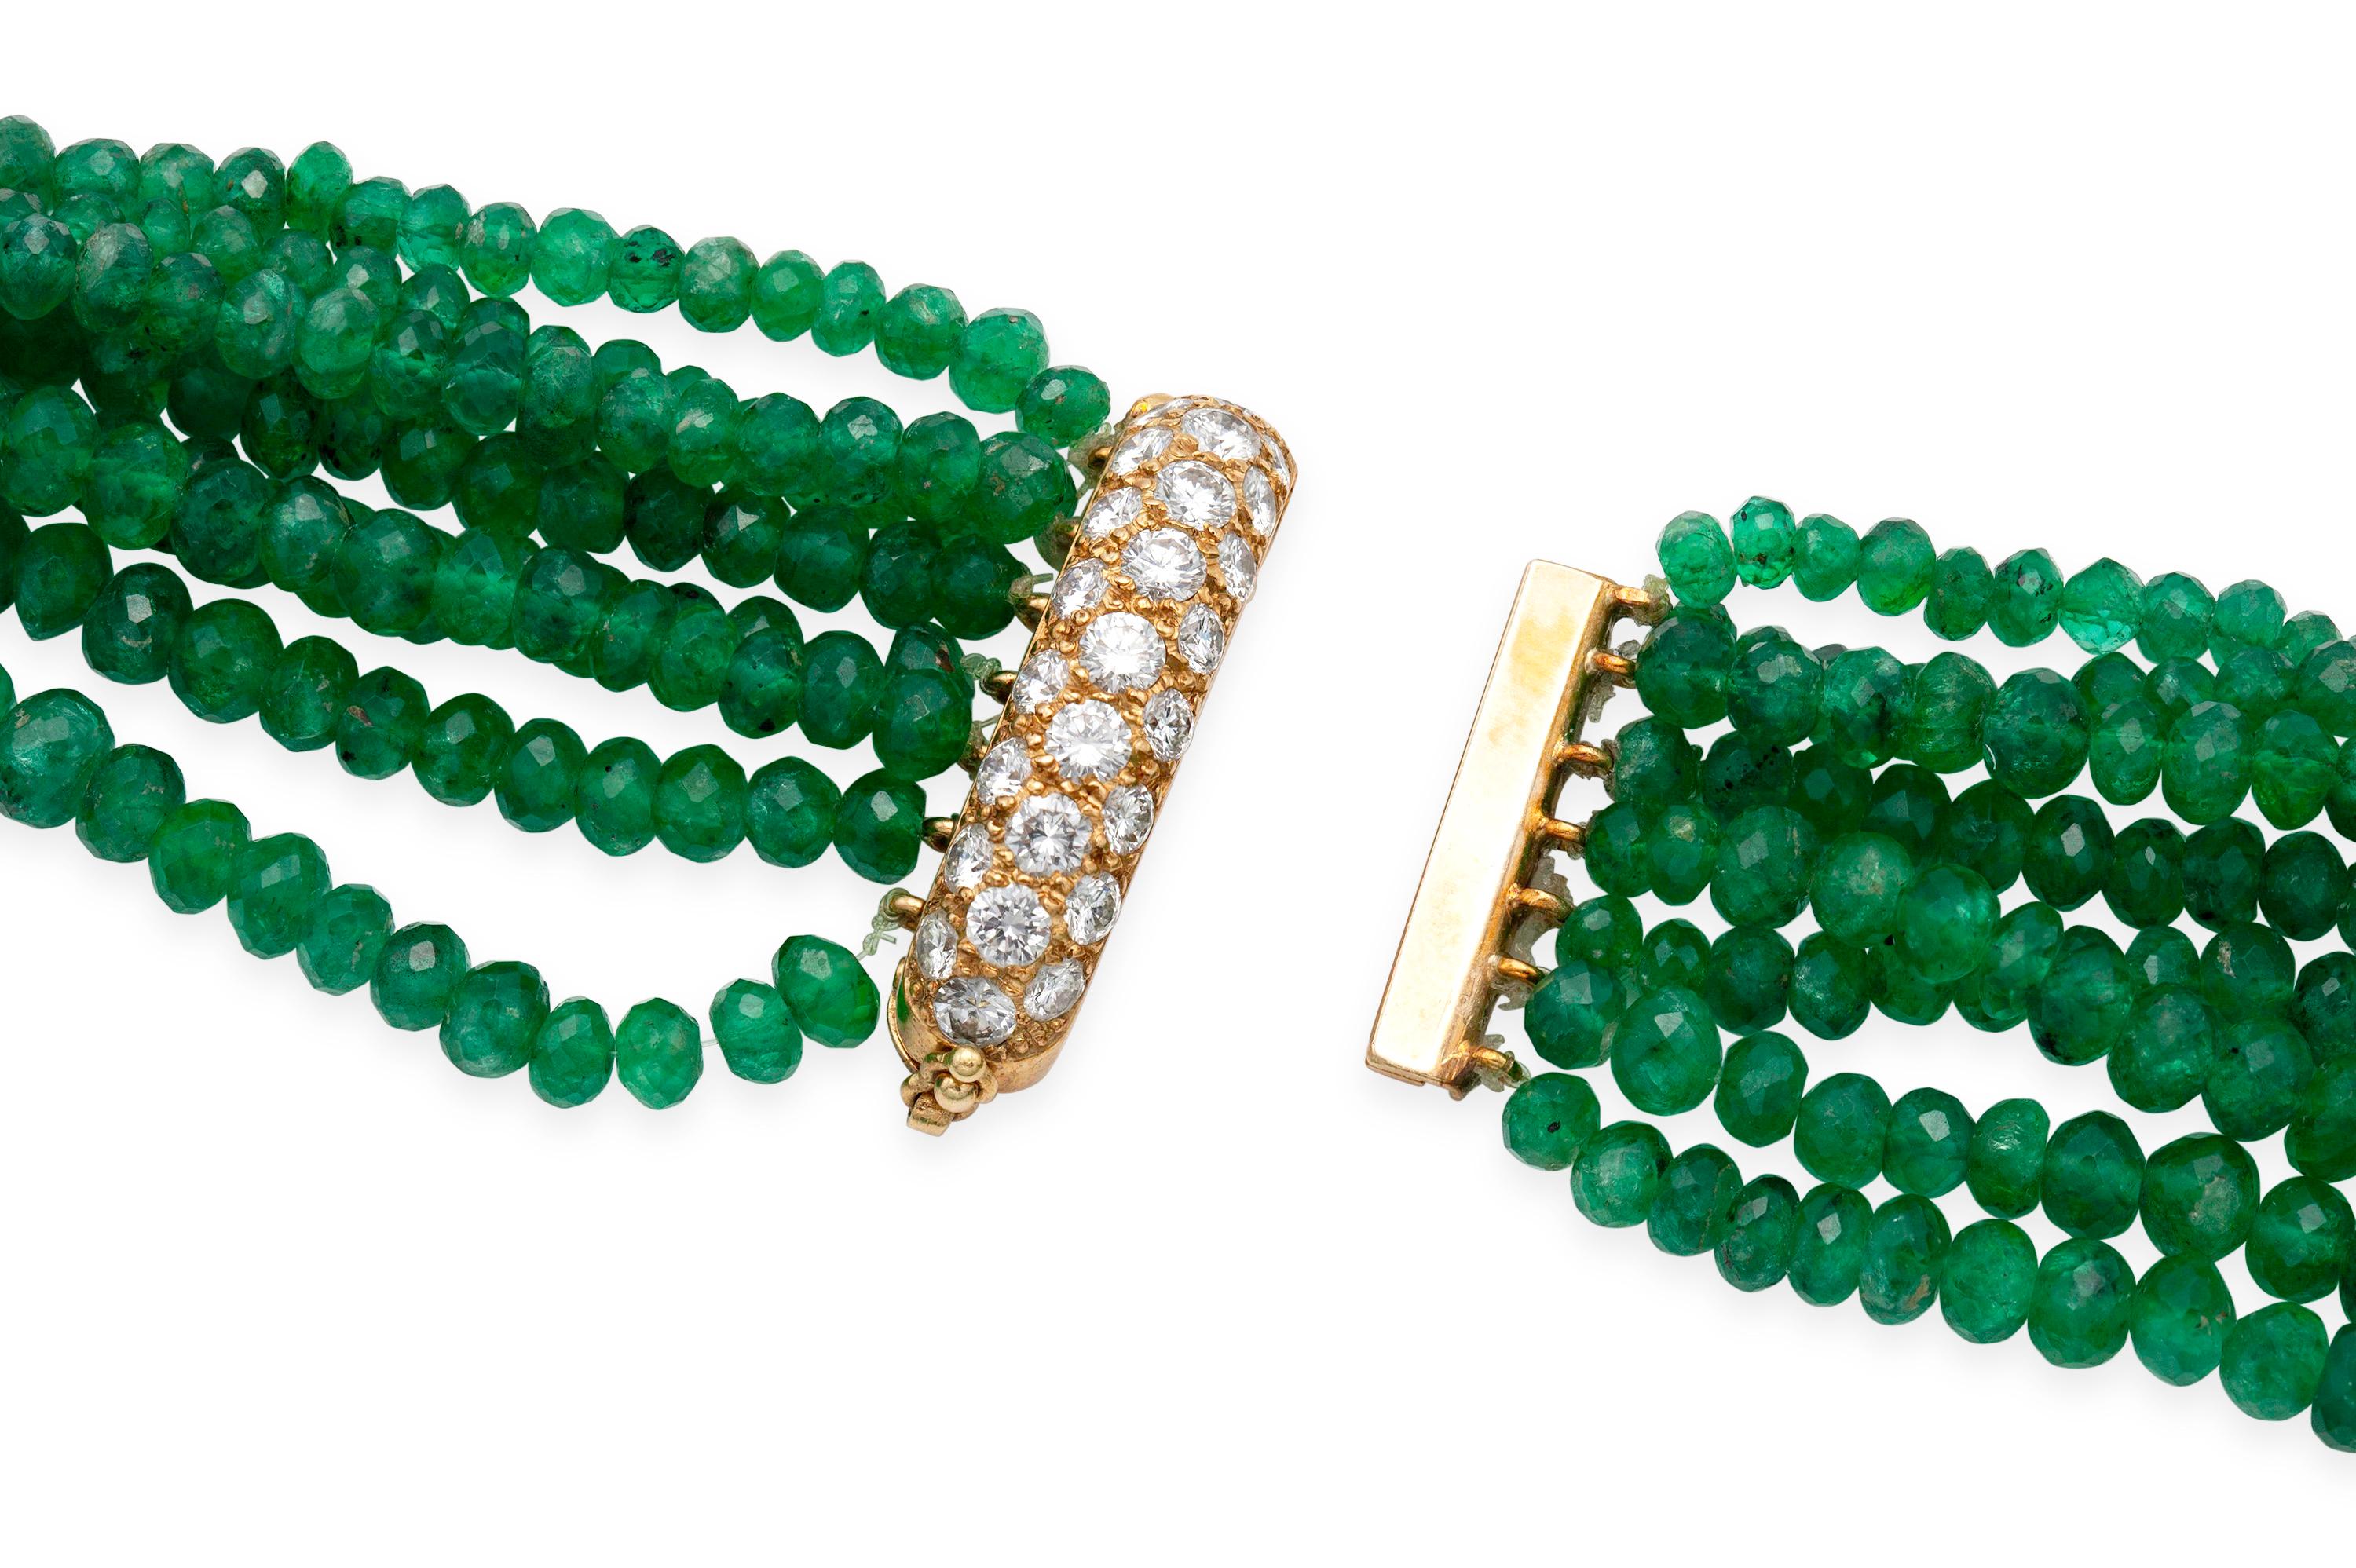 Women's or Men's 850.00 Carat Emerald Beads Necklace For Sale